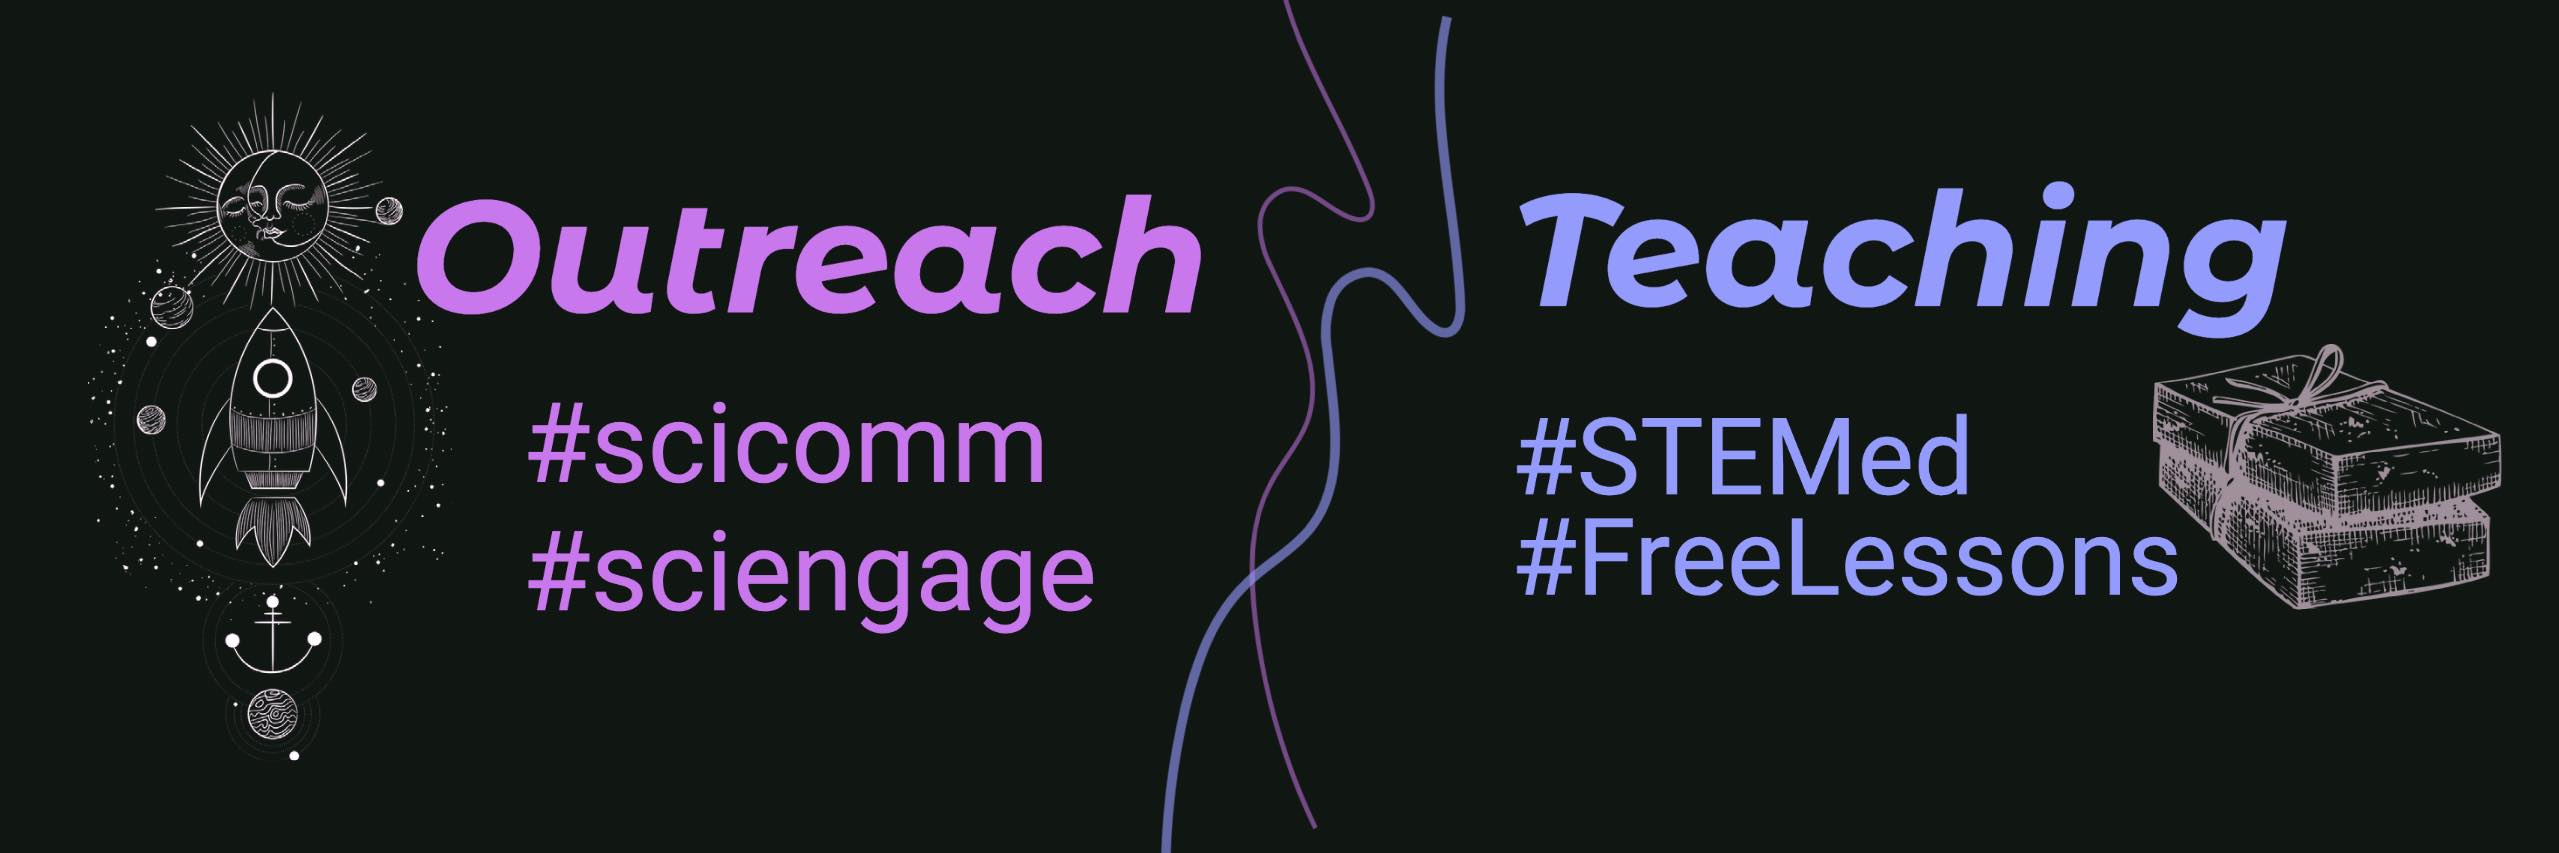 Outreach with hashtags scicomm and sci-engage. Teaching with hashtags STEM-ed and Free Lessons